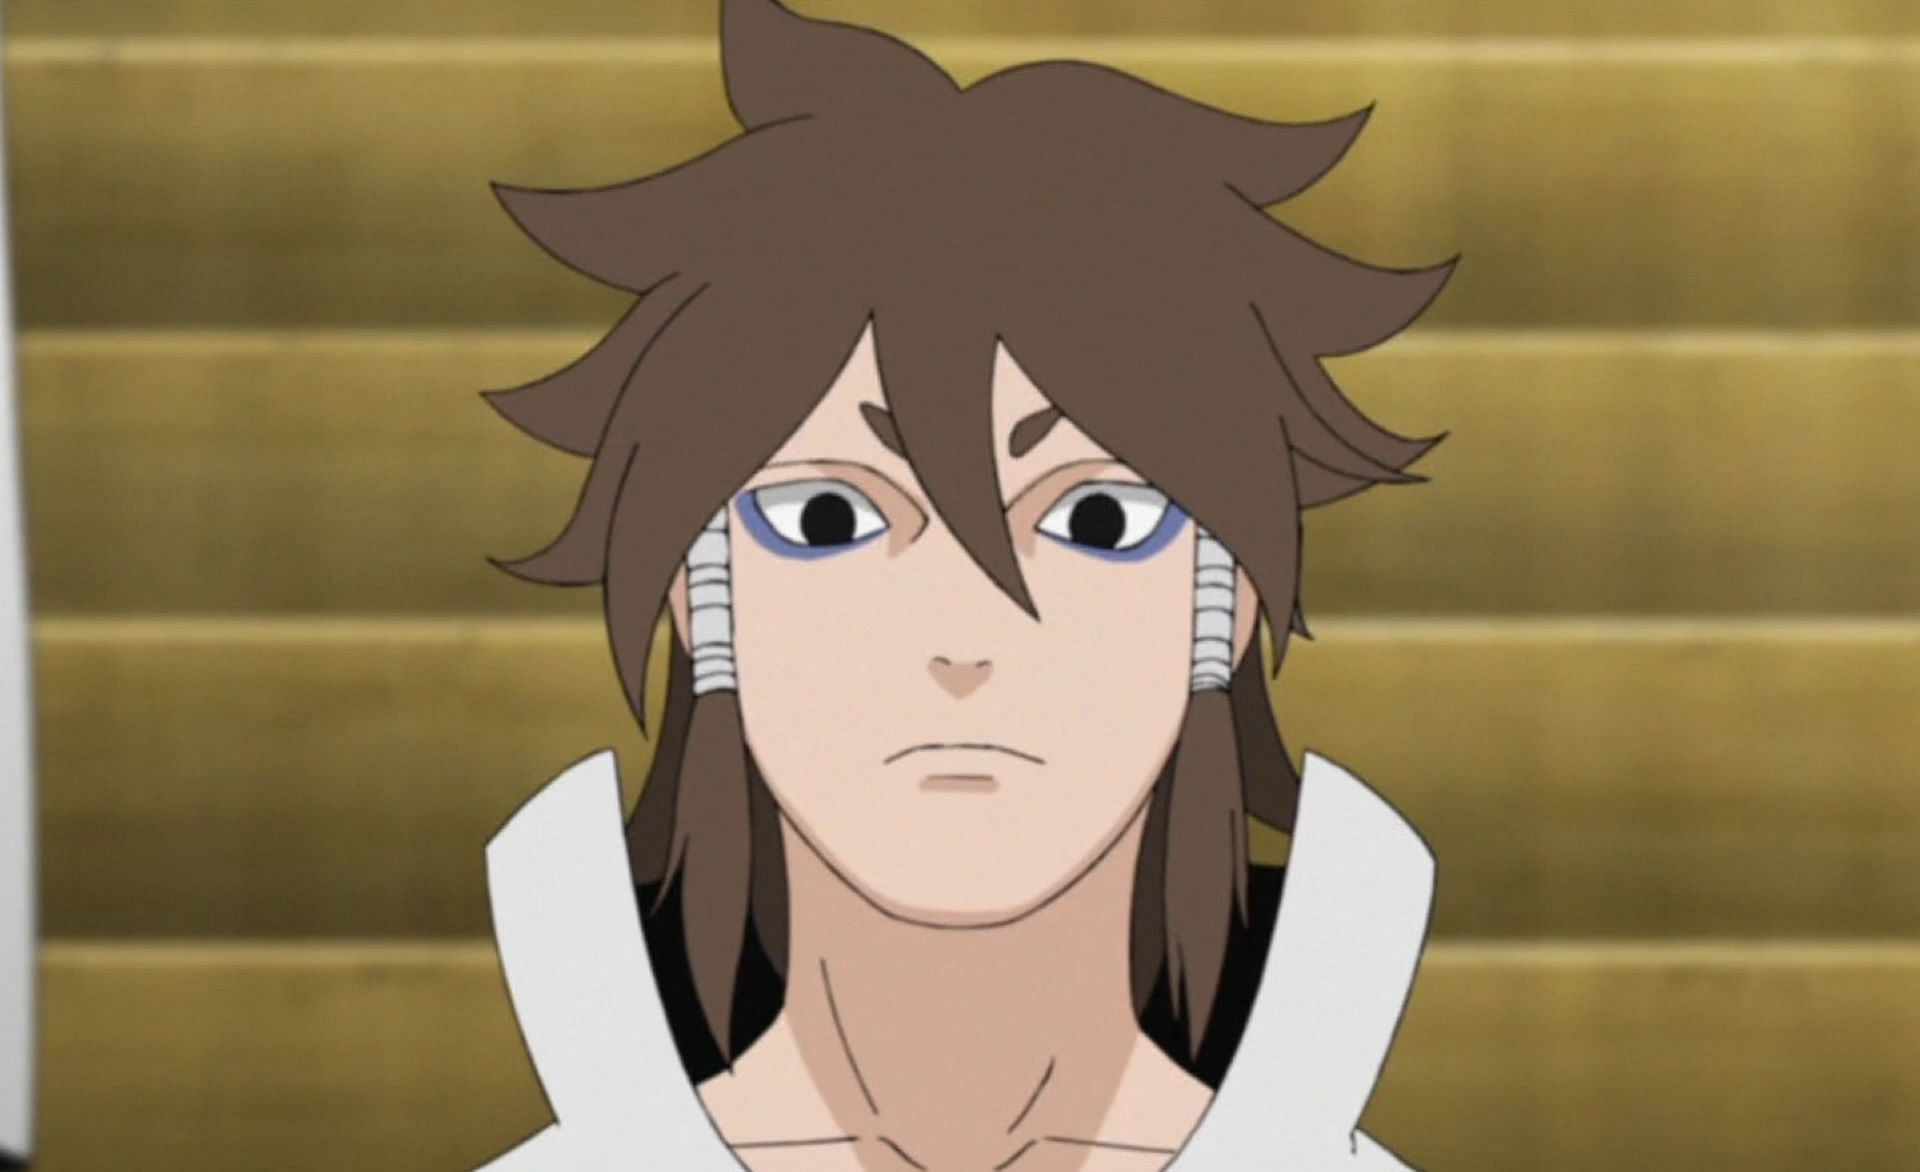 Indra as seen in the anime (Image via Pierrot)